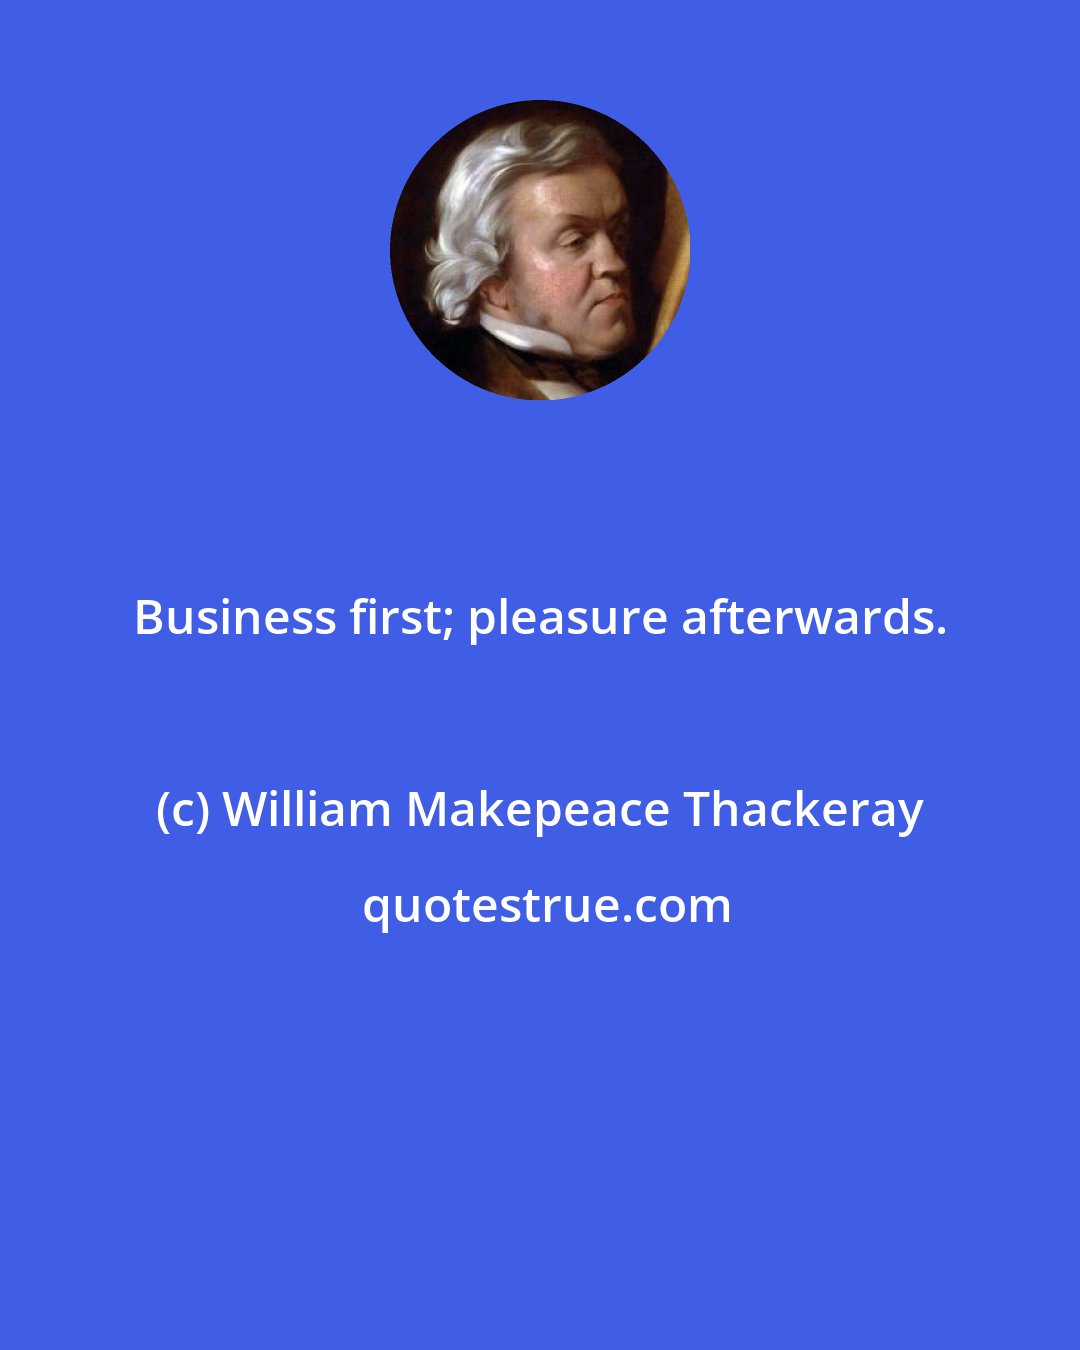 William Makepeace Thackeray: Business first; pleasure afterwards.